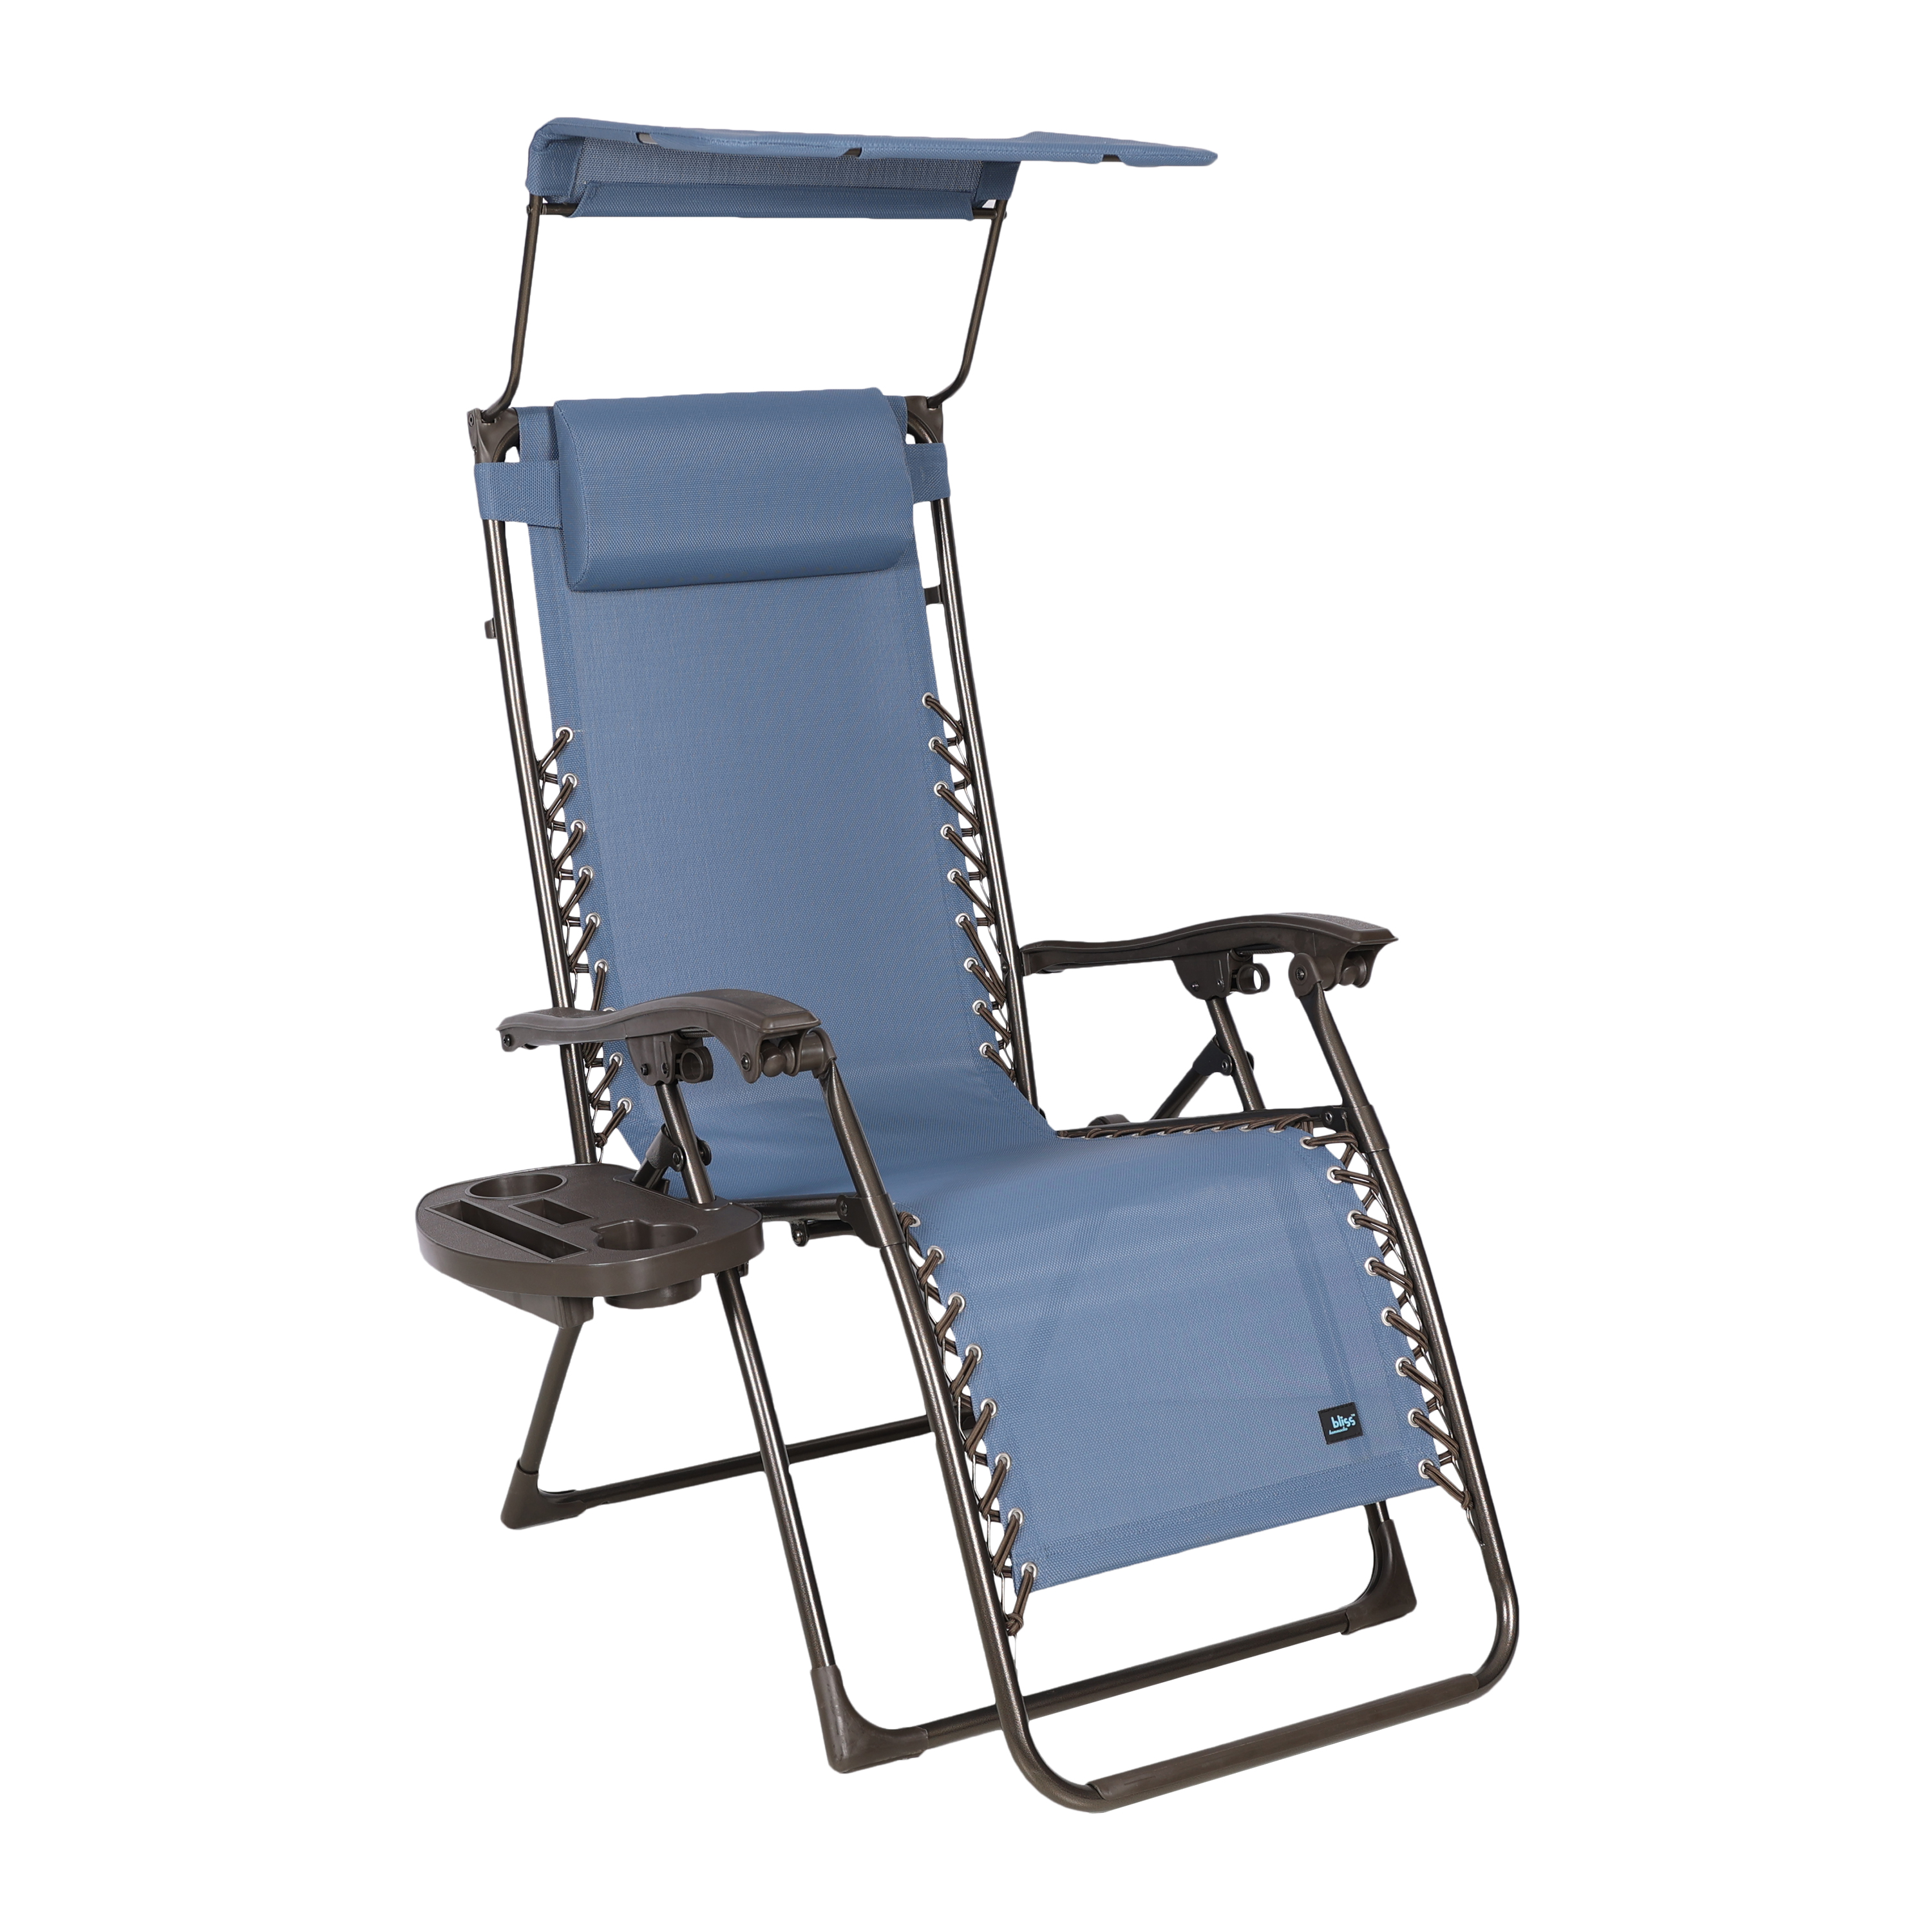 Bliss Hammocks 26" Wide Base Model Zero Gravity Chair w/ Canopy, Pillow, & Drink Tray Folding Outdoor Lawn, Deck, Patio Adjustable Lounge Chair, 300lbs. Weather and Rust Resistant, Denim Blue - image 1 of 4